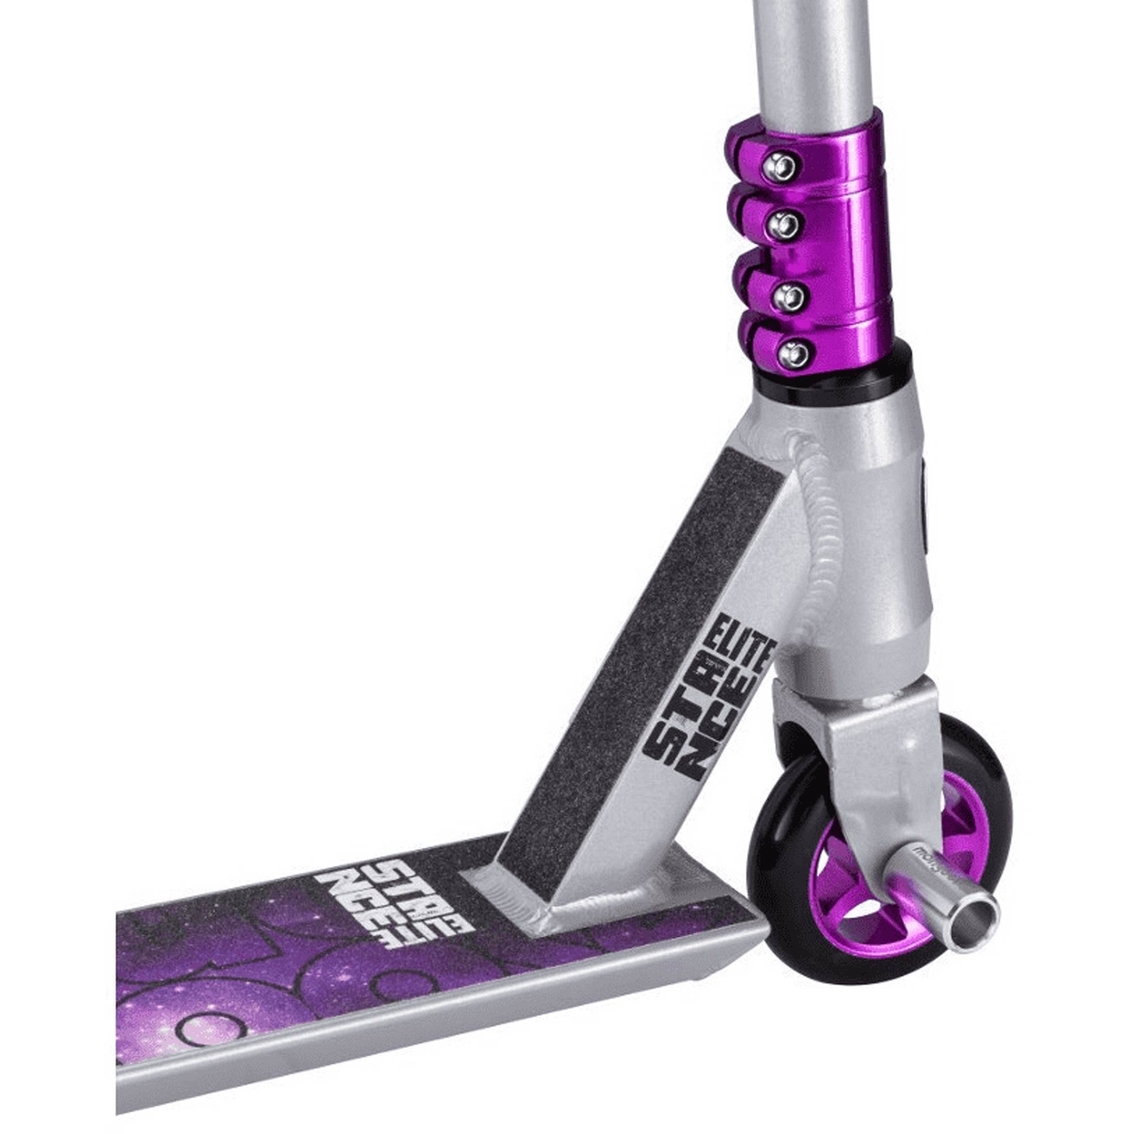 Mongoose Stance Elite Freestyle Scooter - Image 3 of 7